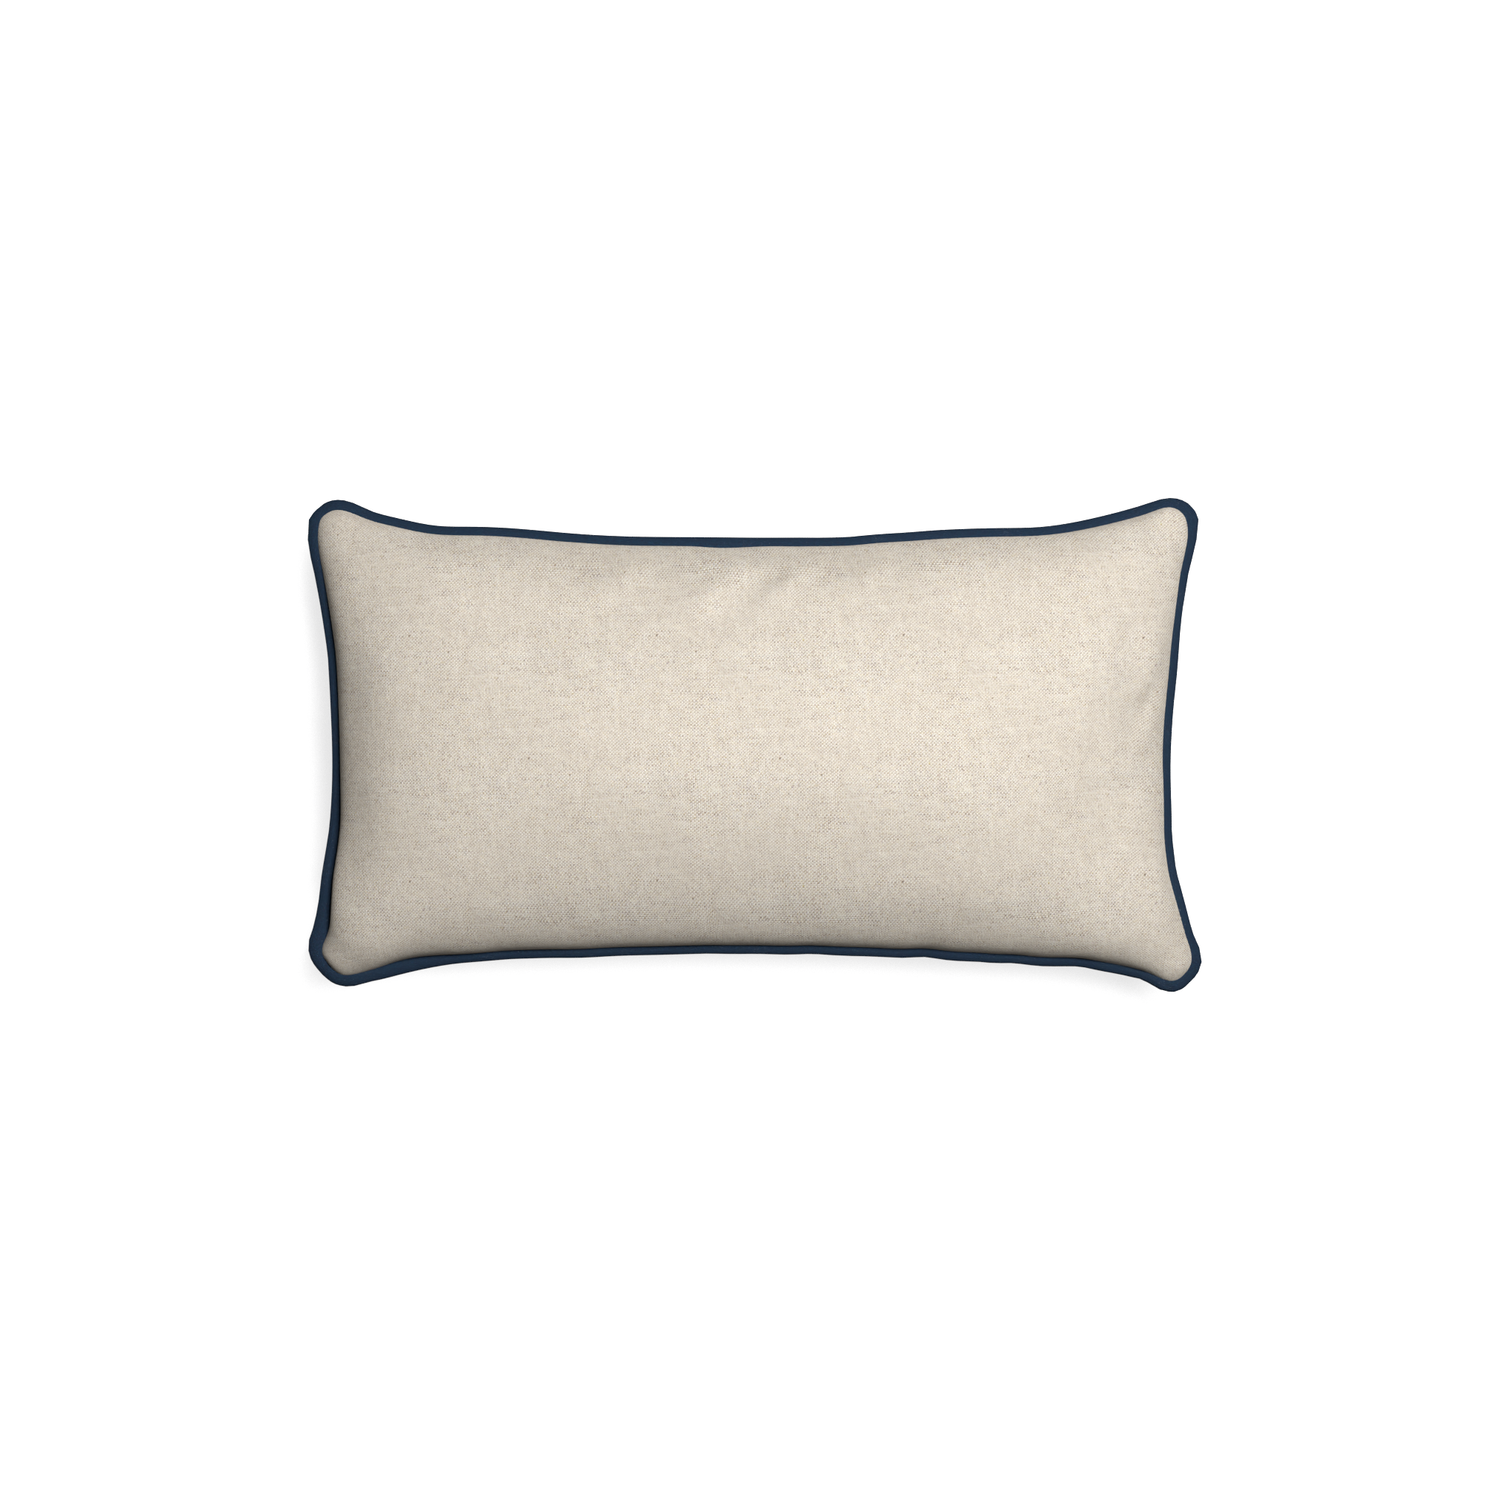 Petite-lumbar oat custom light brownpillow with c piping on white background